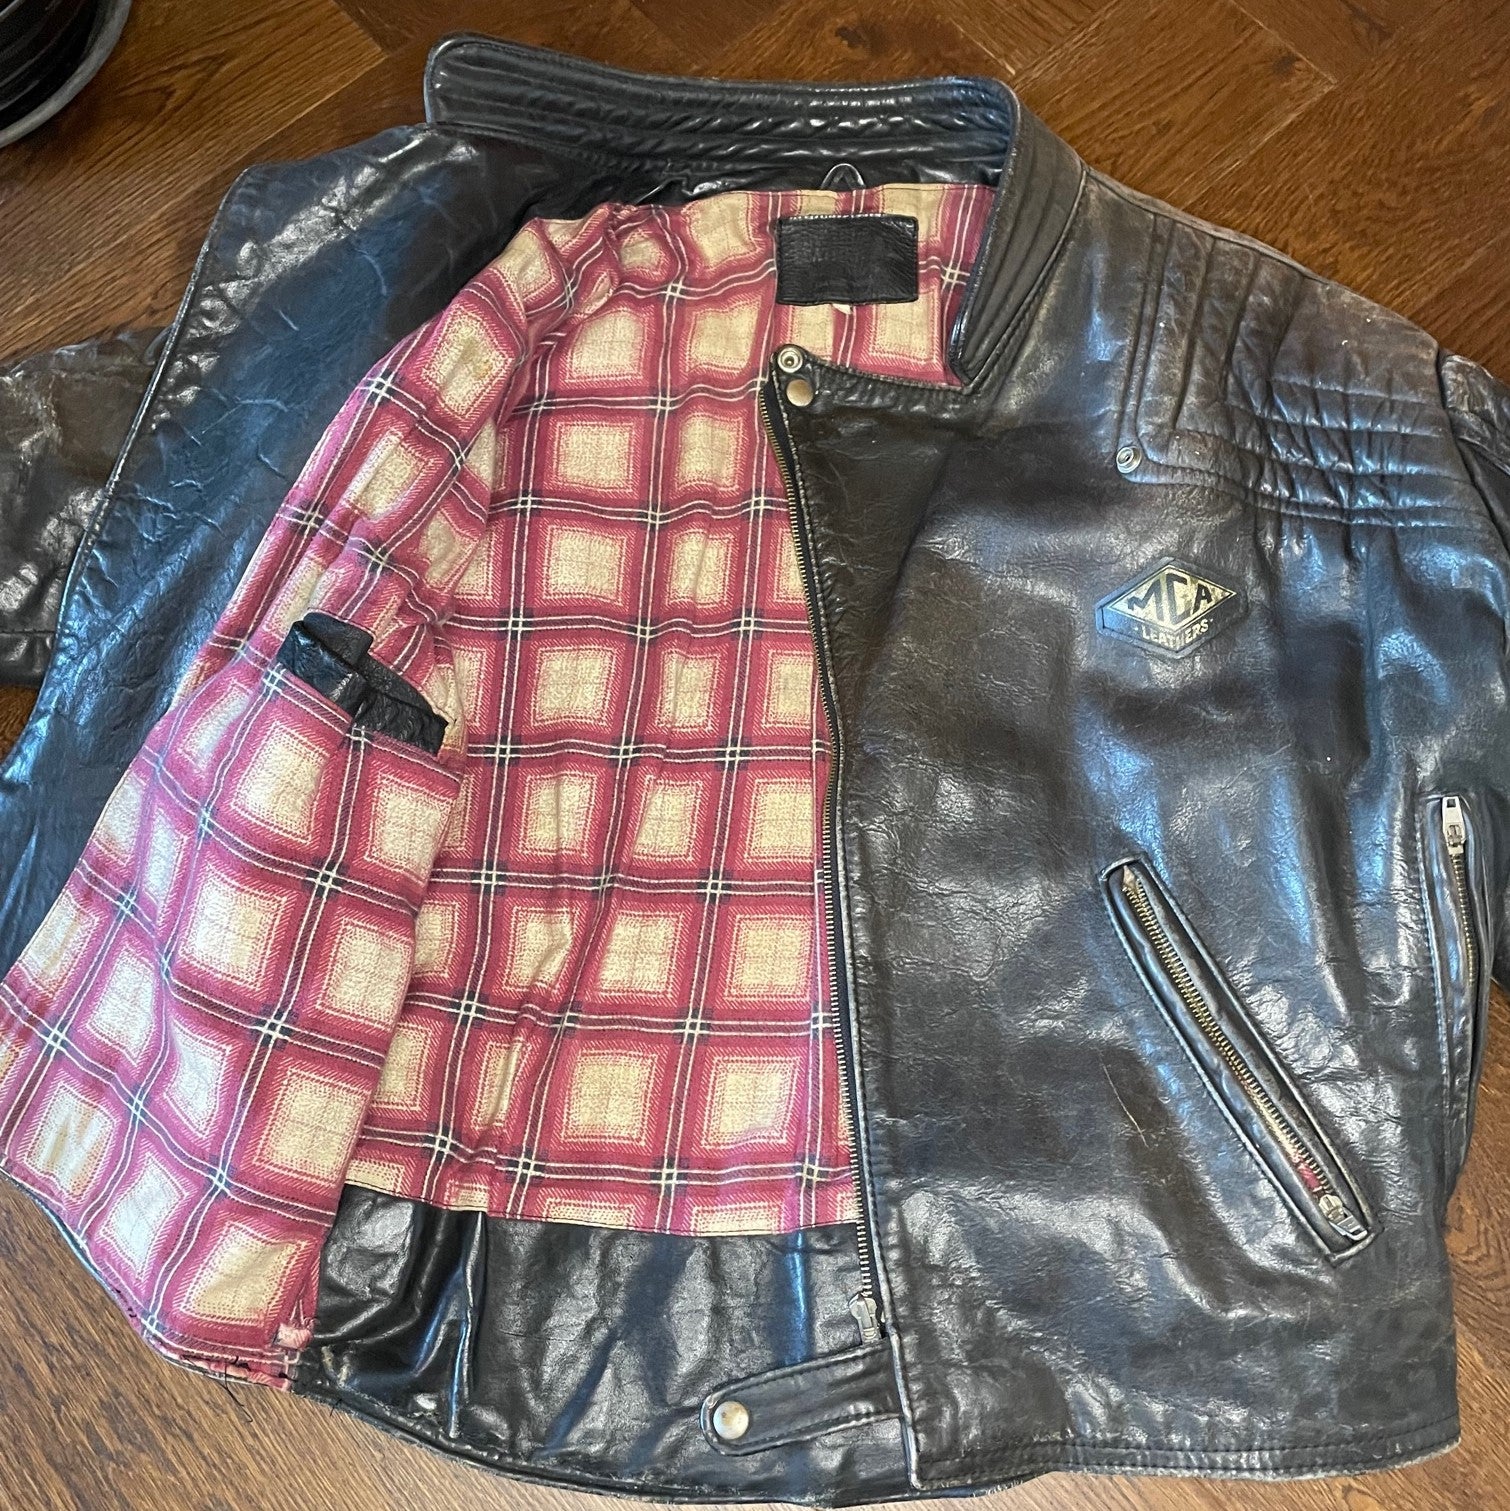 Vintage MCA biker jacket with the perfect patina